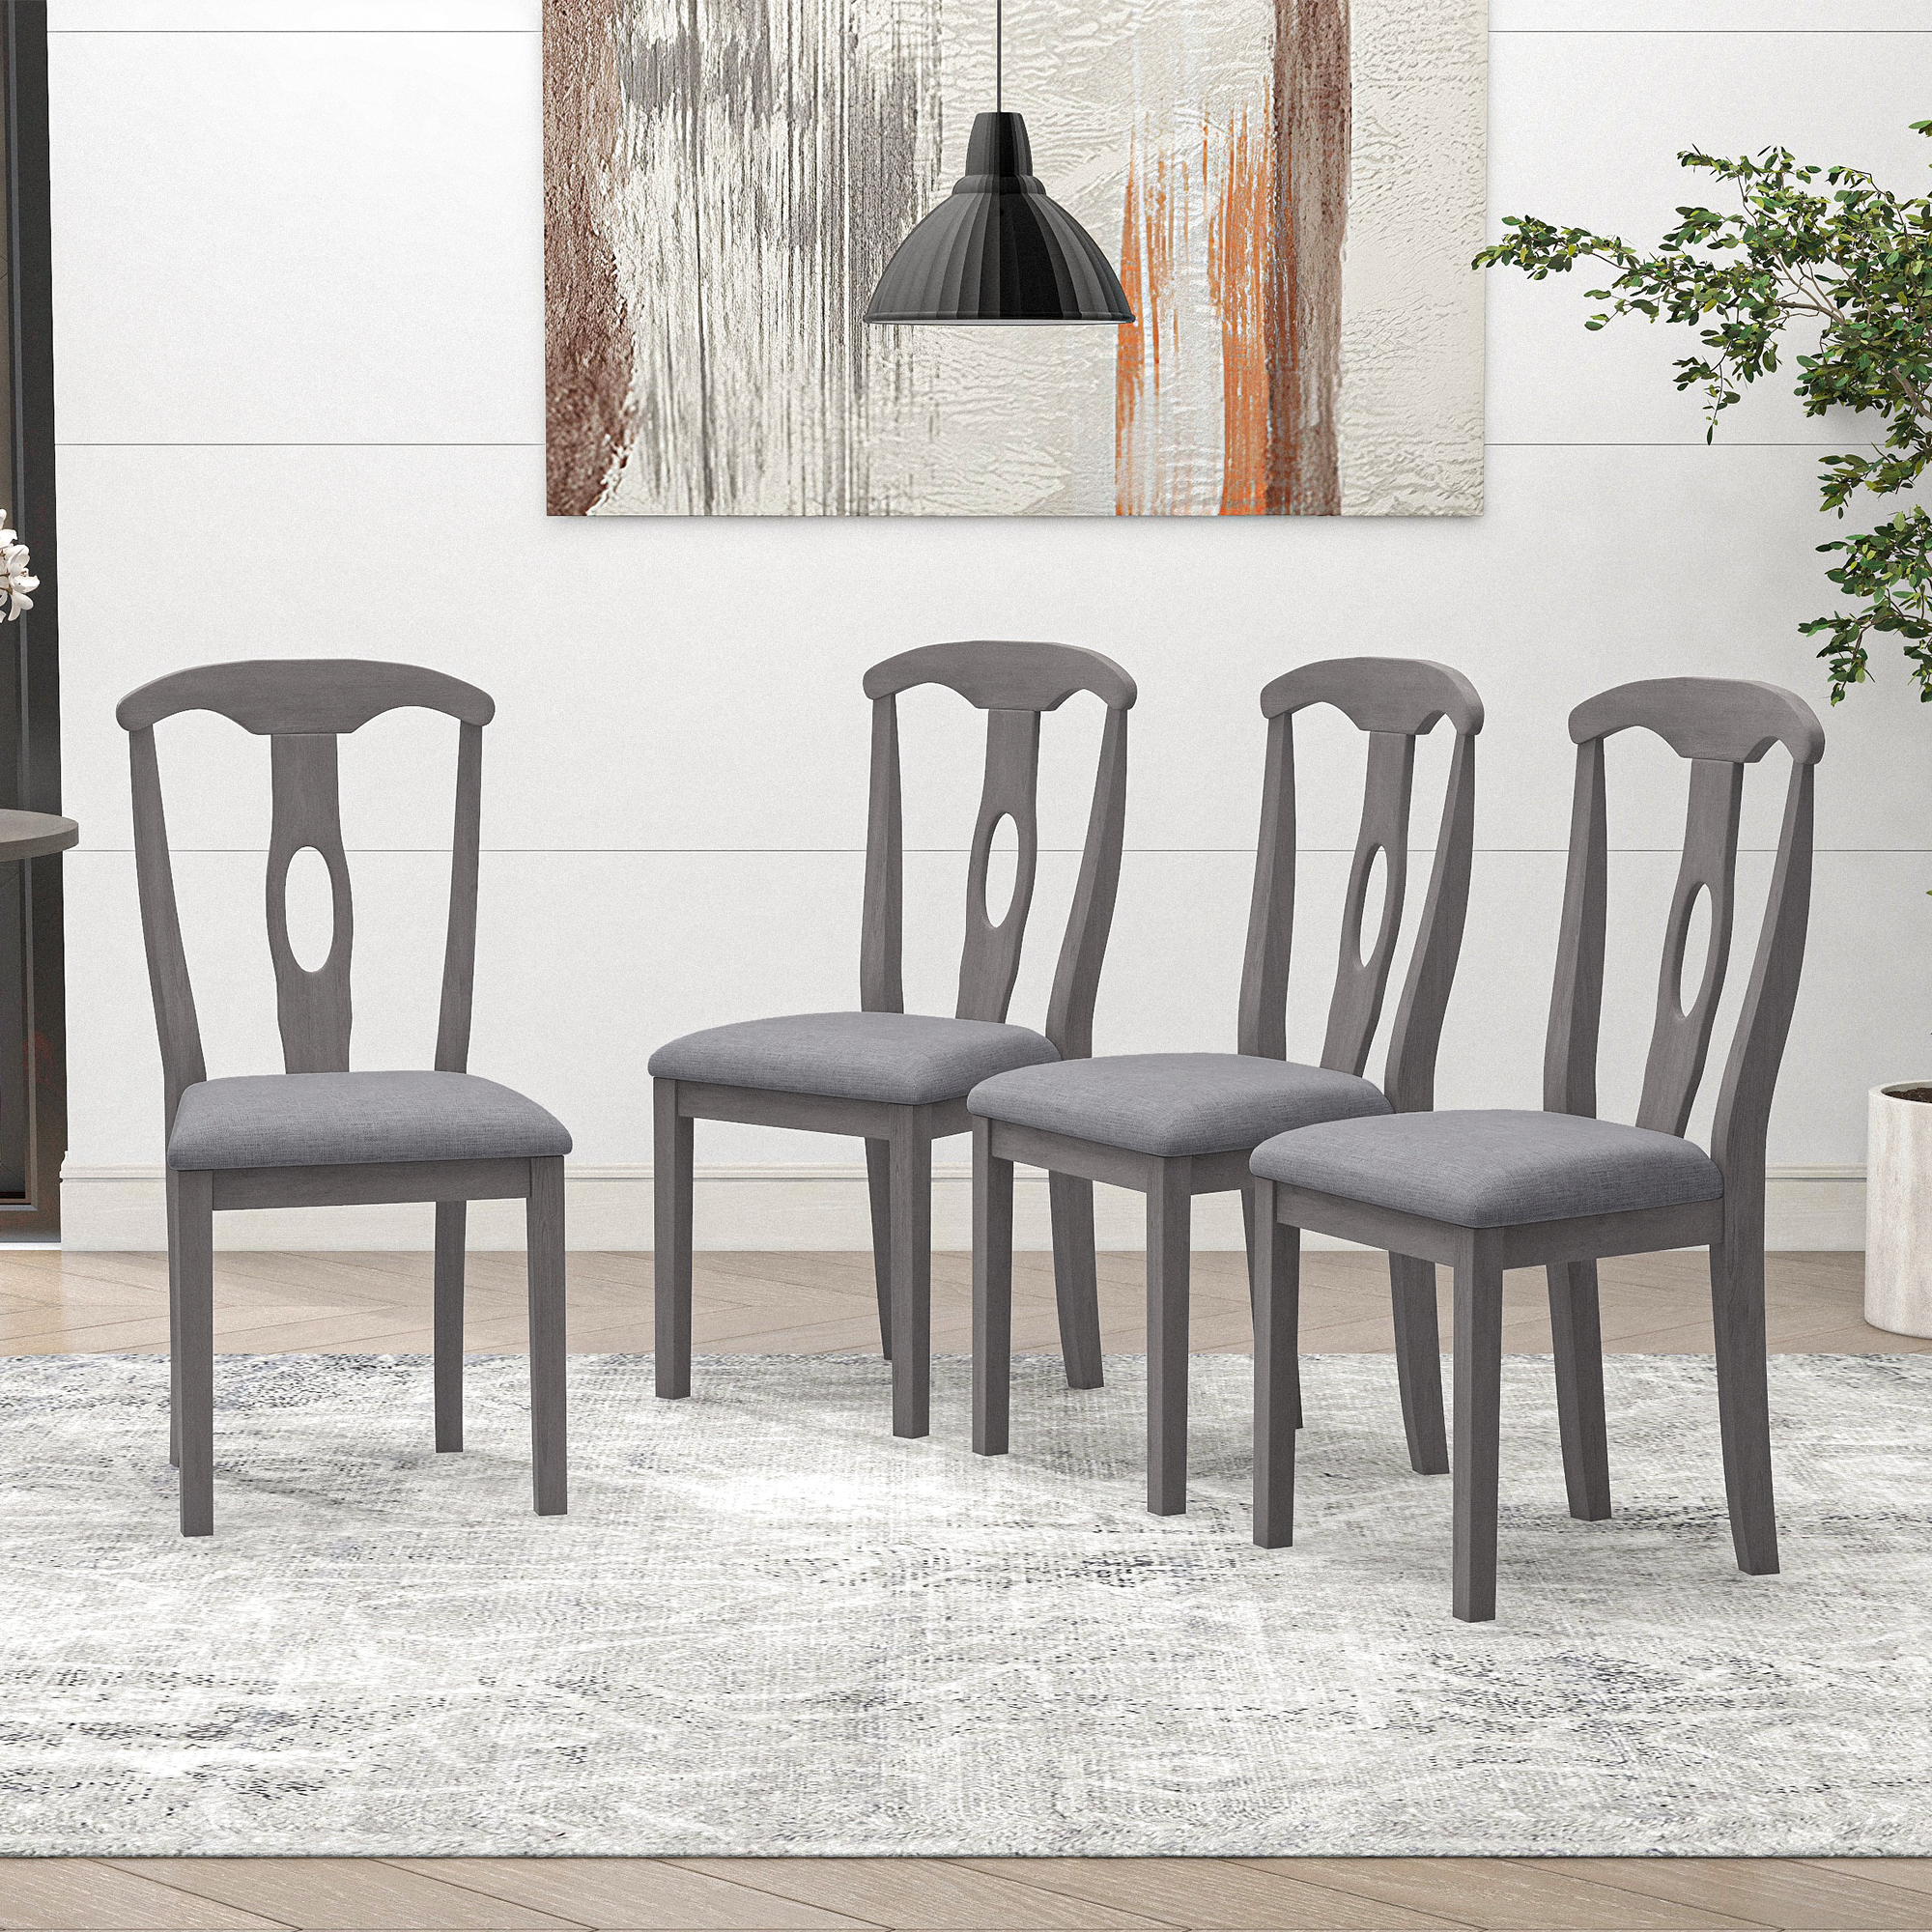 Rustic Wood Padded Dining Chairs for 4, Grey